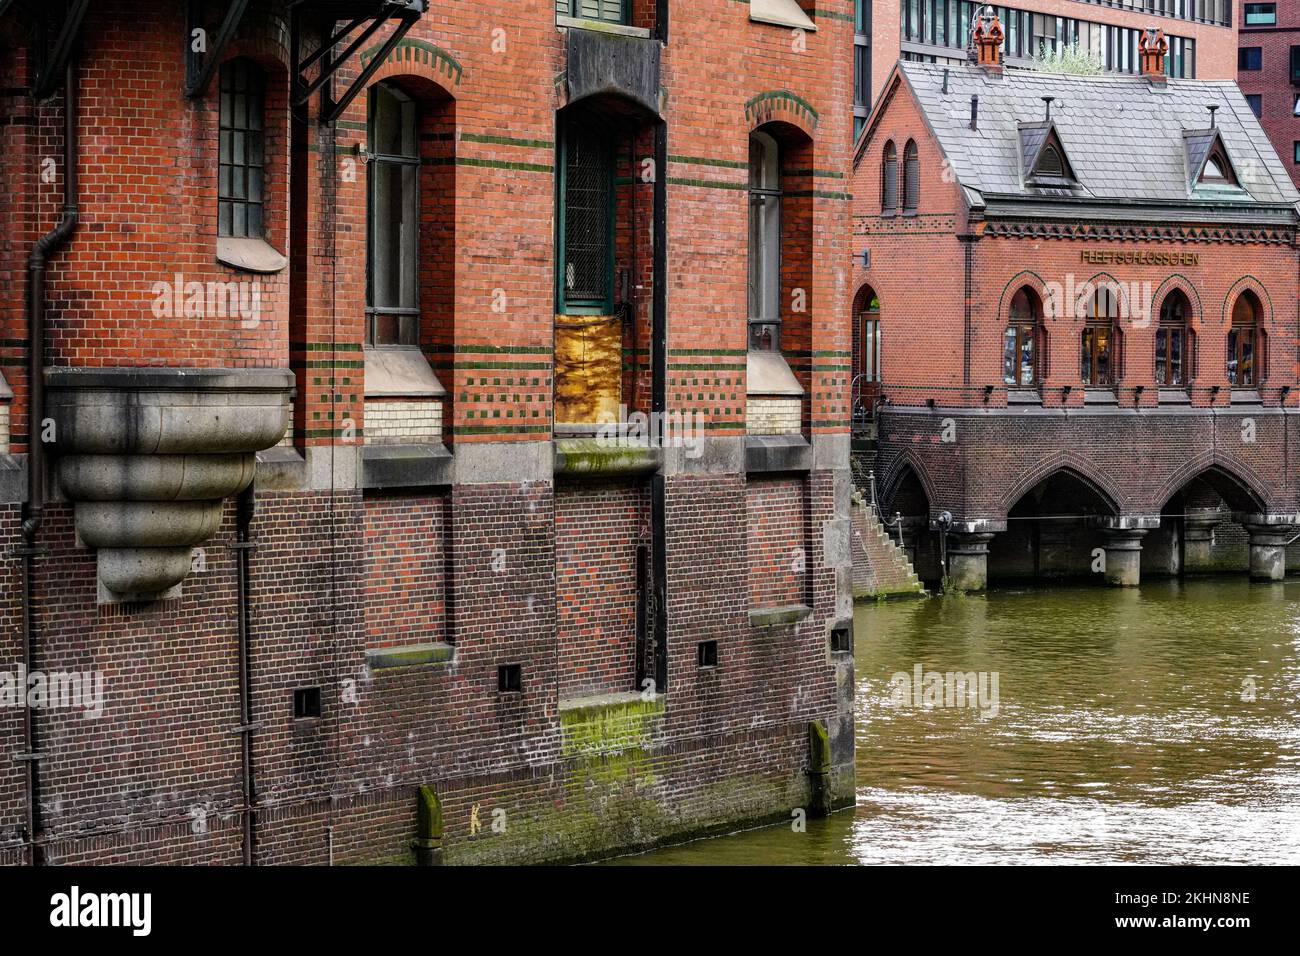 View of the Fleetschlösschen, a historic building of the Speicherstadt in Hamburg. It is located at the intersection of Brooktorkai/St.-Annen-Brücke, Stock Photo